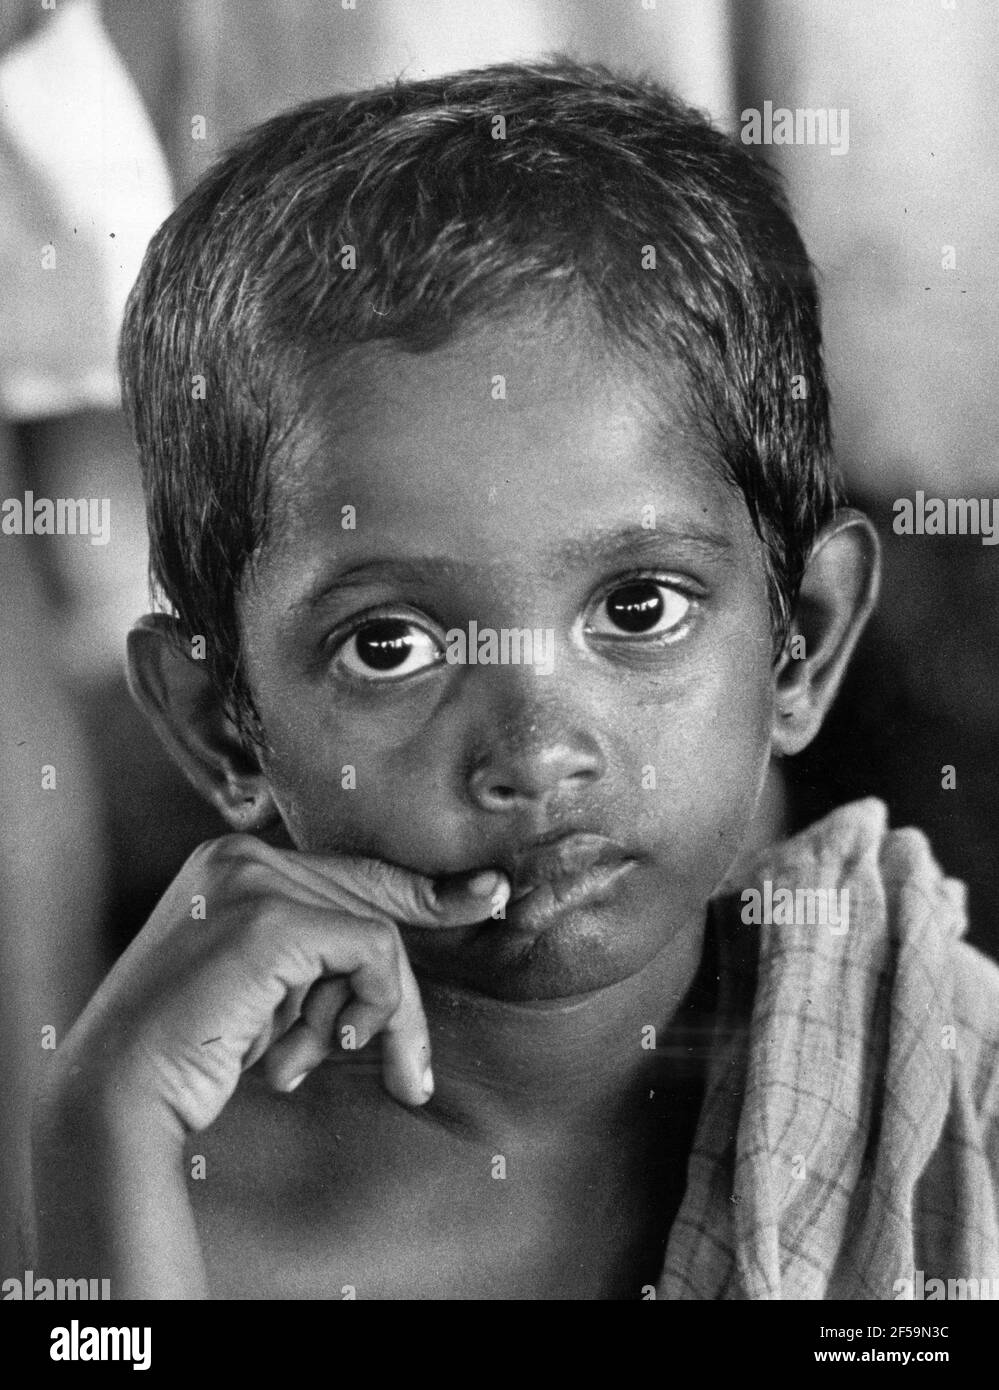 1971-06-24 The East Pakistani refugees only managed to bring a few belongings with them to India where their presence is creating growing religious tension.   Photo: Leif Engberg / DN / TT / Code: 15 Stock Photo